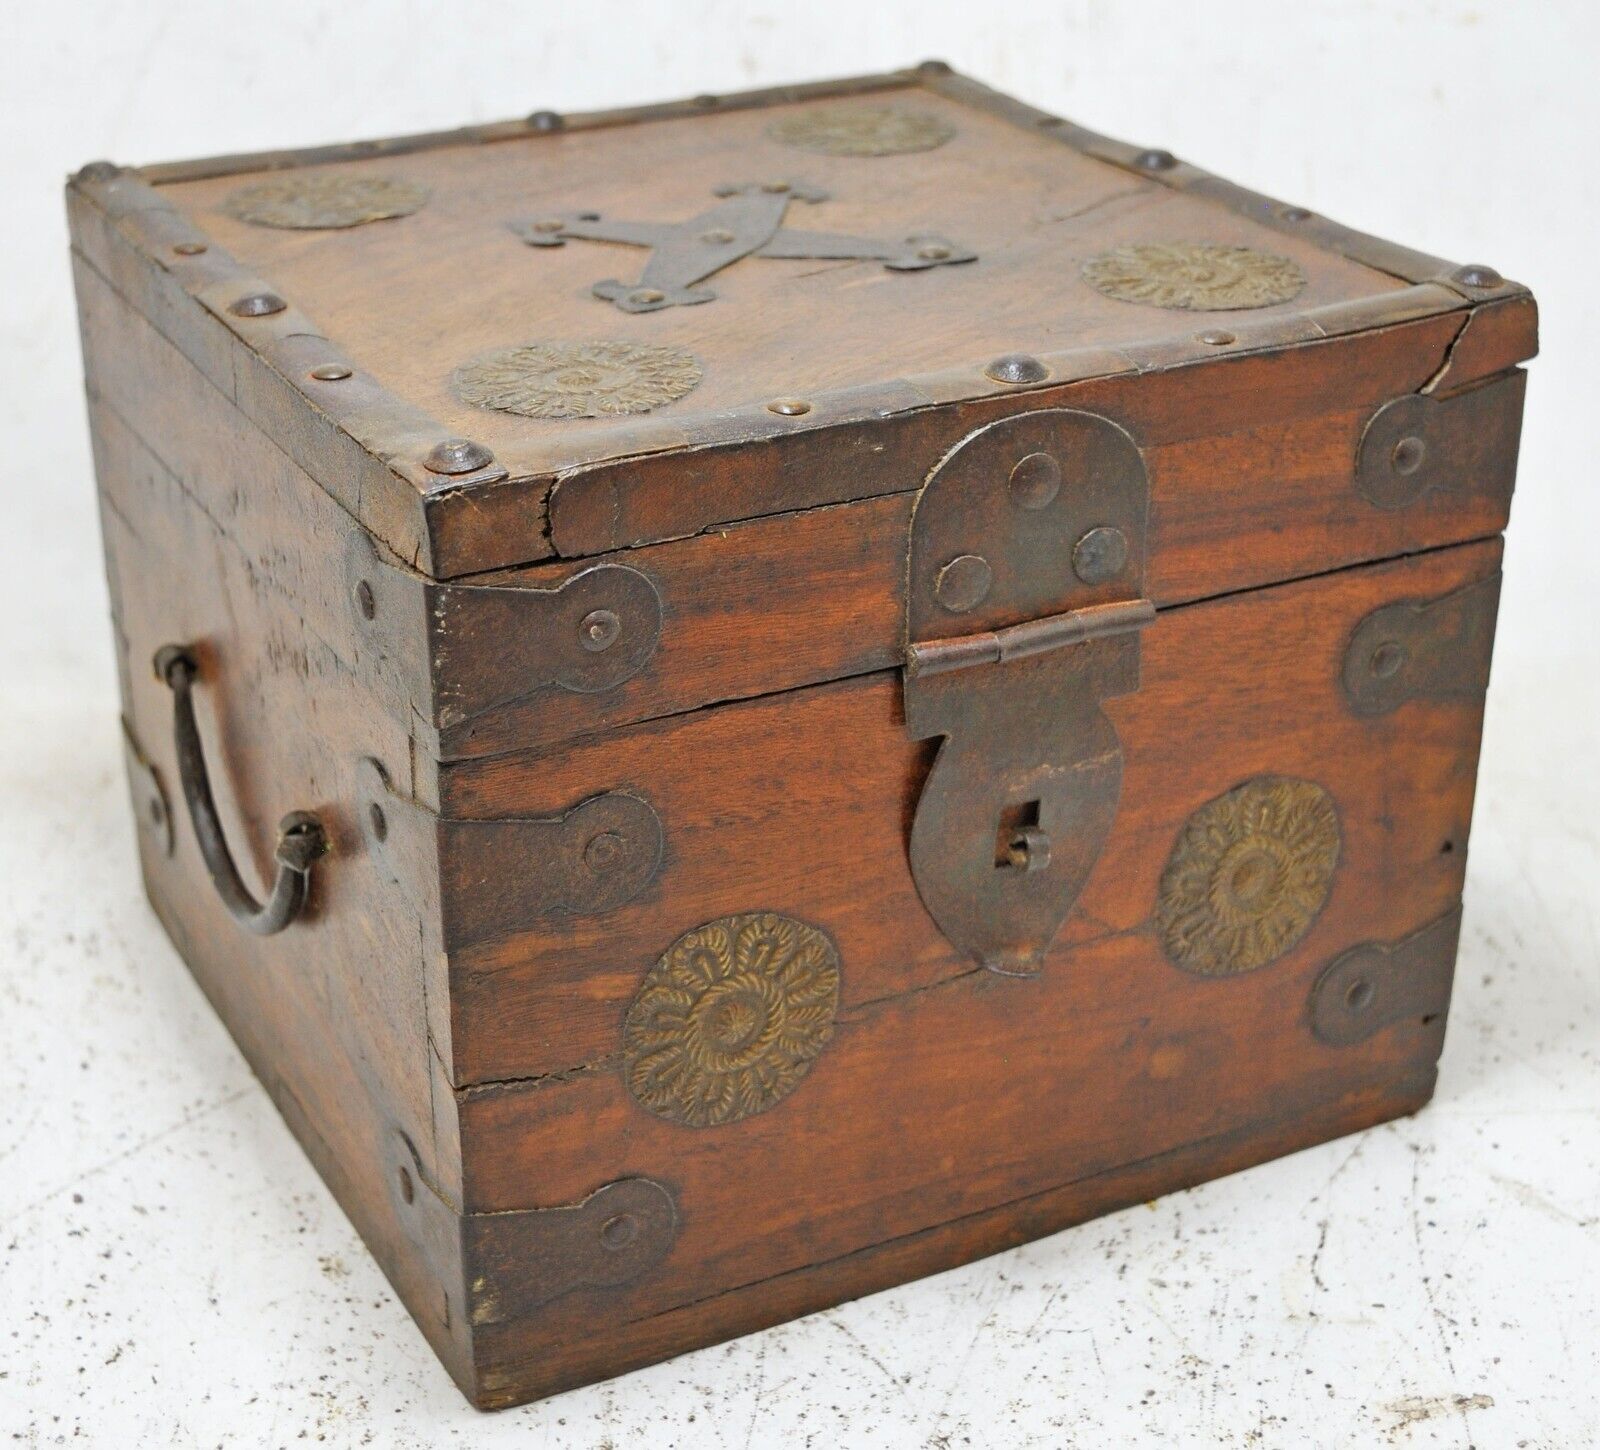 Vintage Wooden Square Storage Chest Box Original Old Brass Fitted